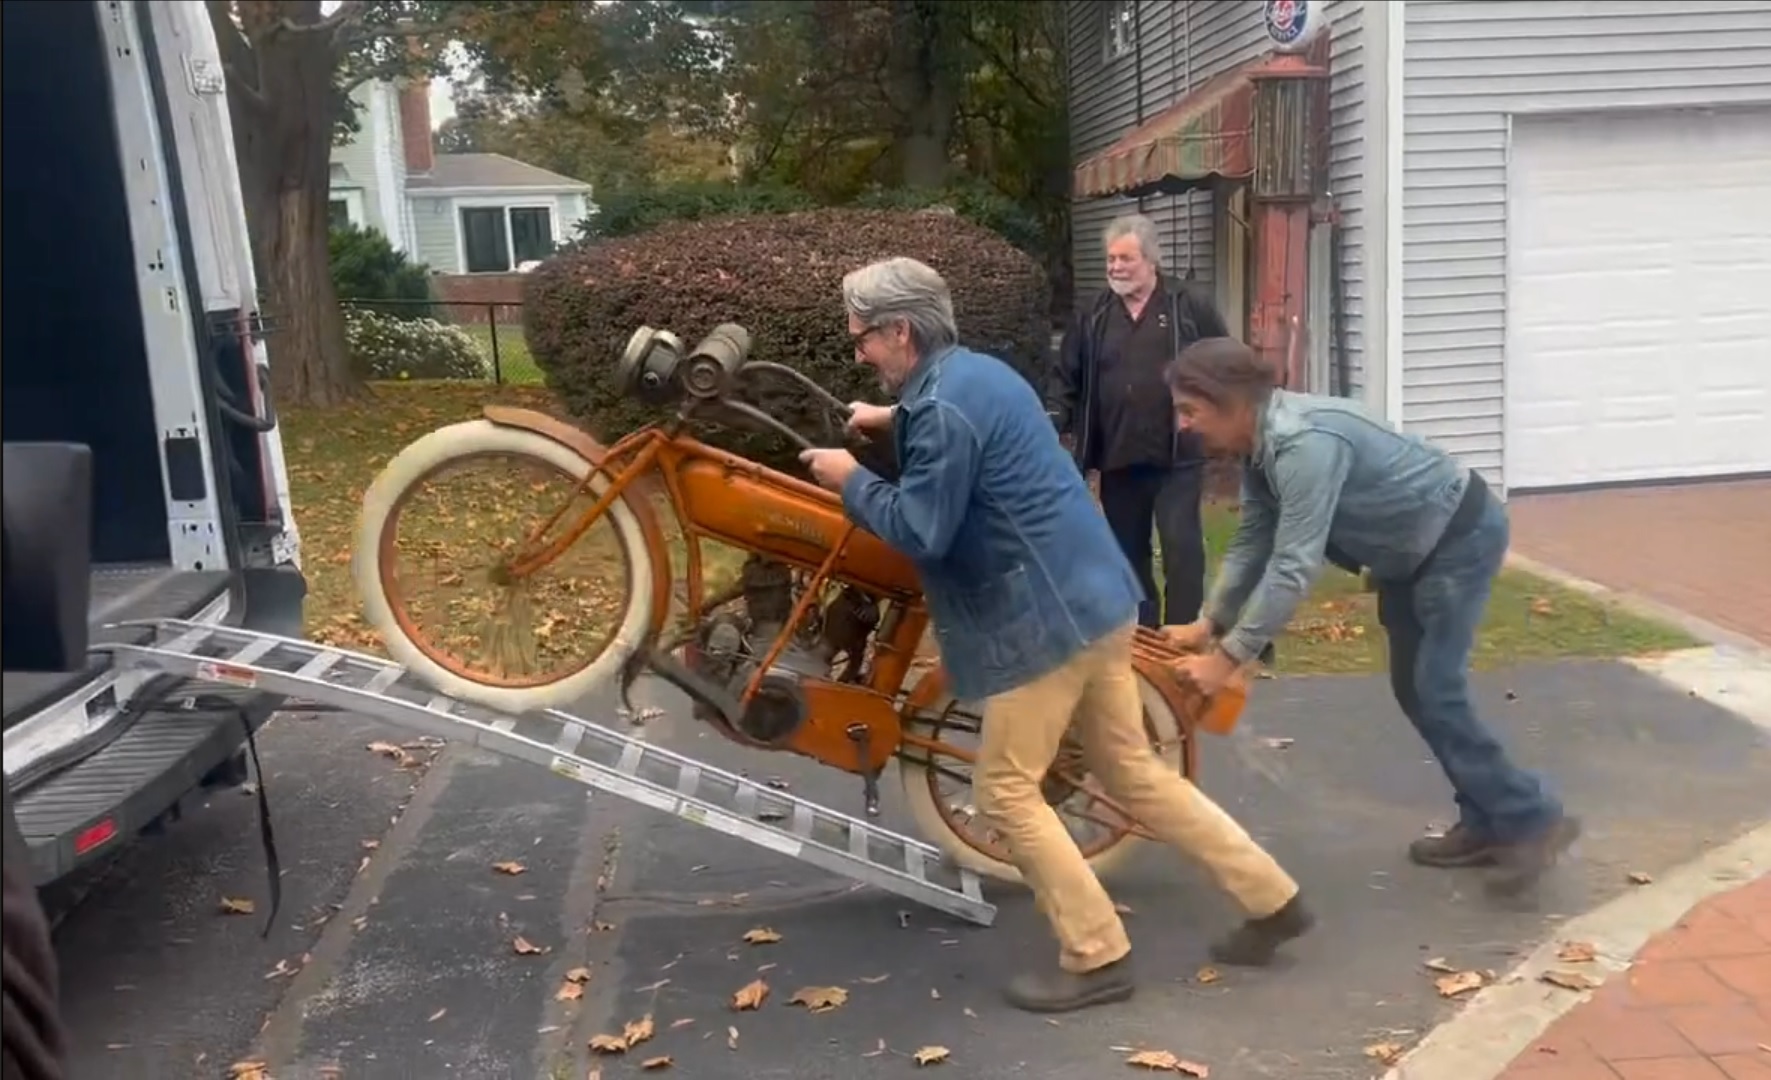 Mike wolfe and Jersey John load the 1915 Flying Merkel twin into their van.